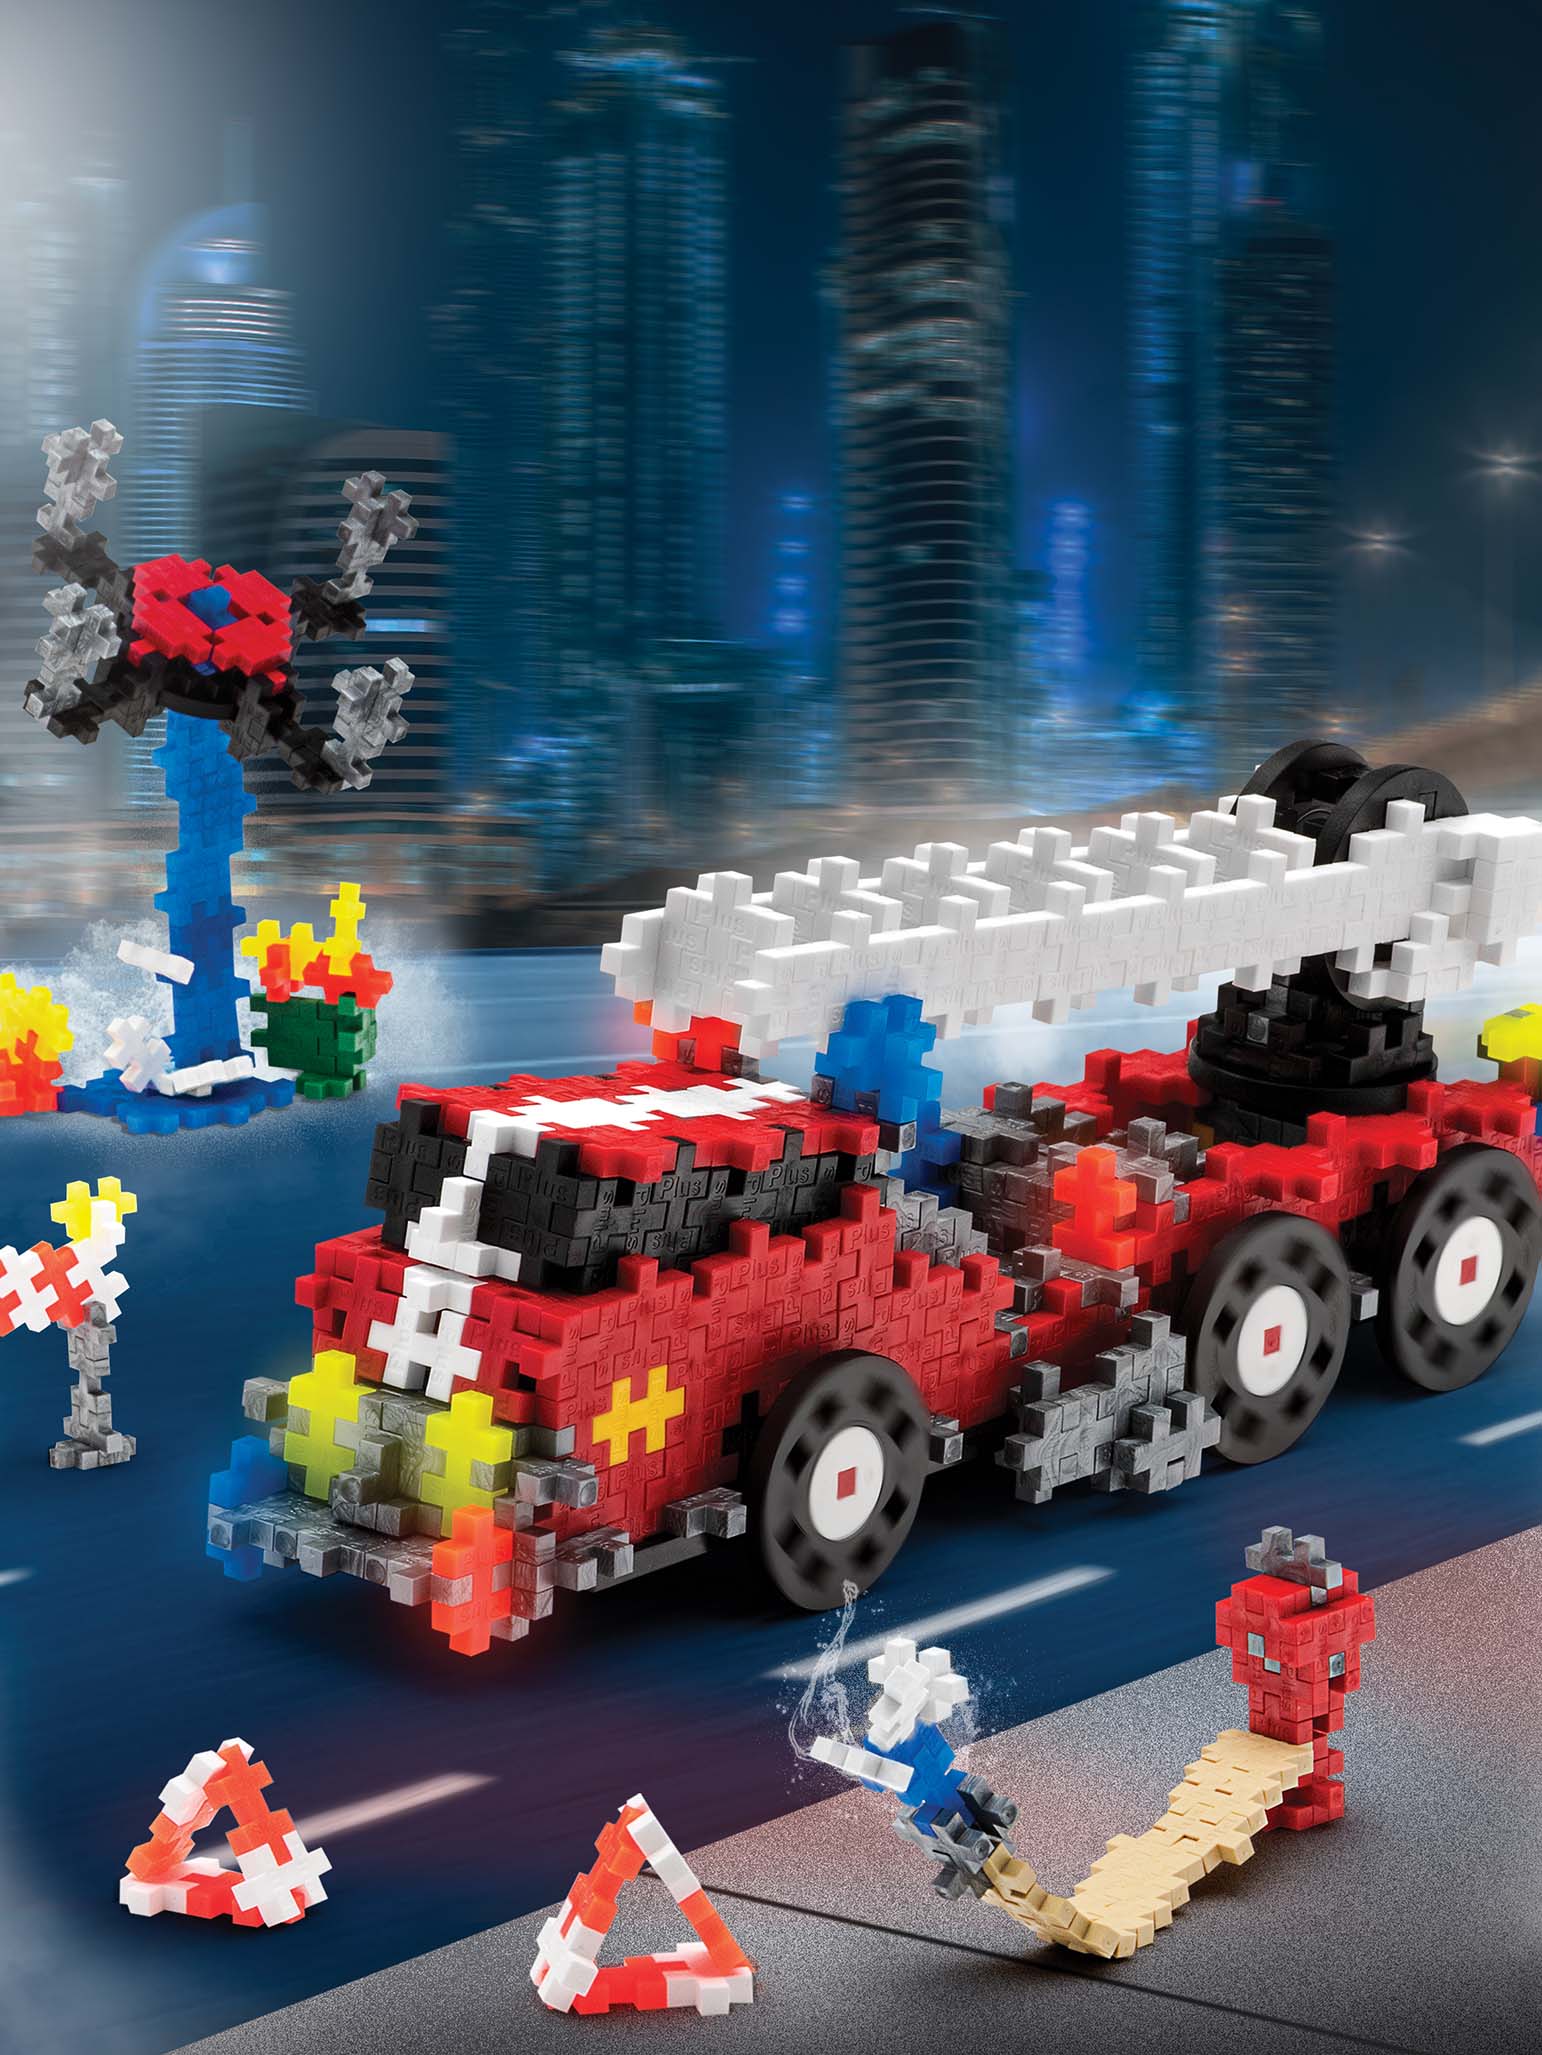 Go! Fire and Rescue 500pcs